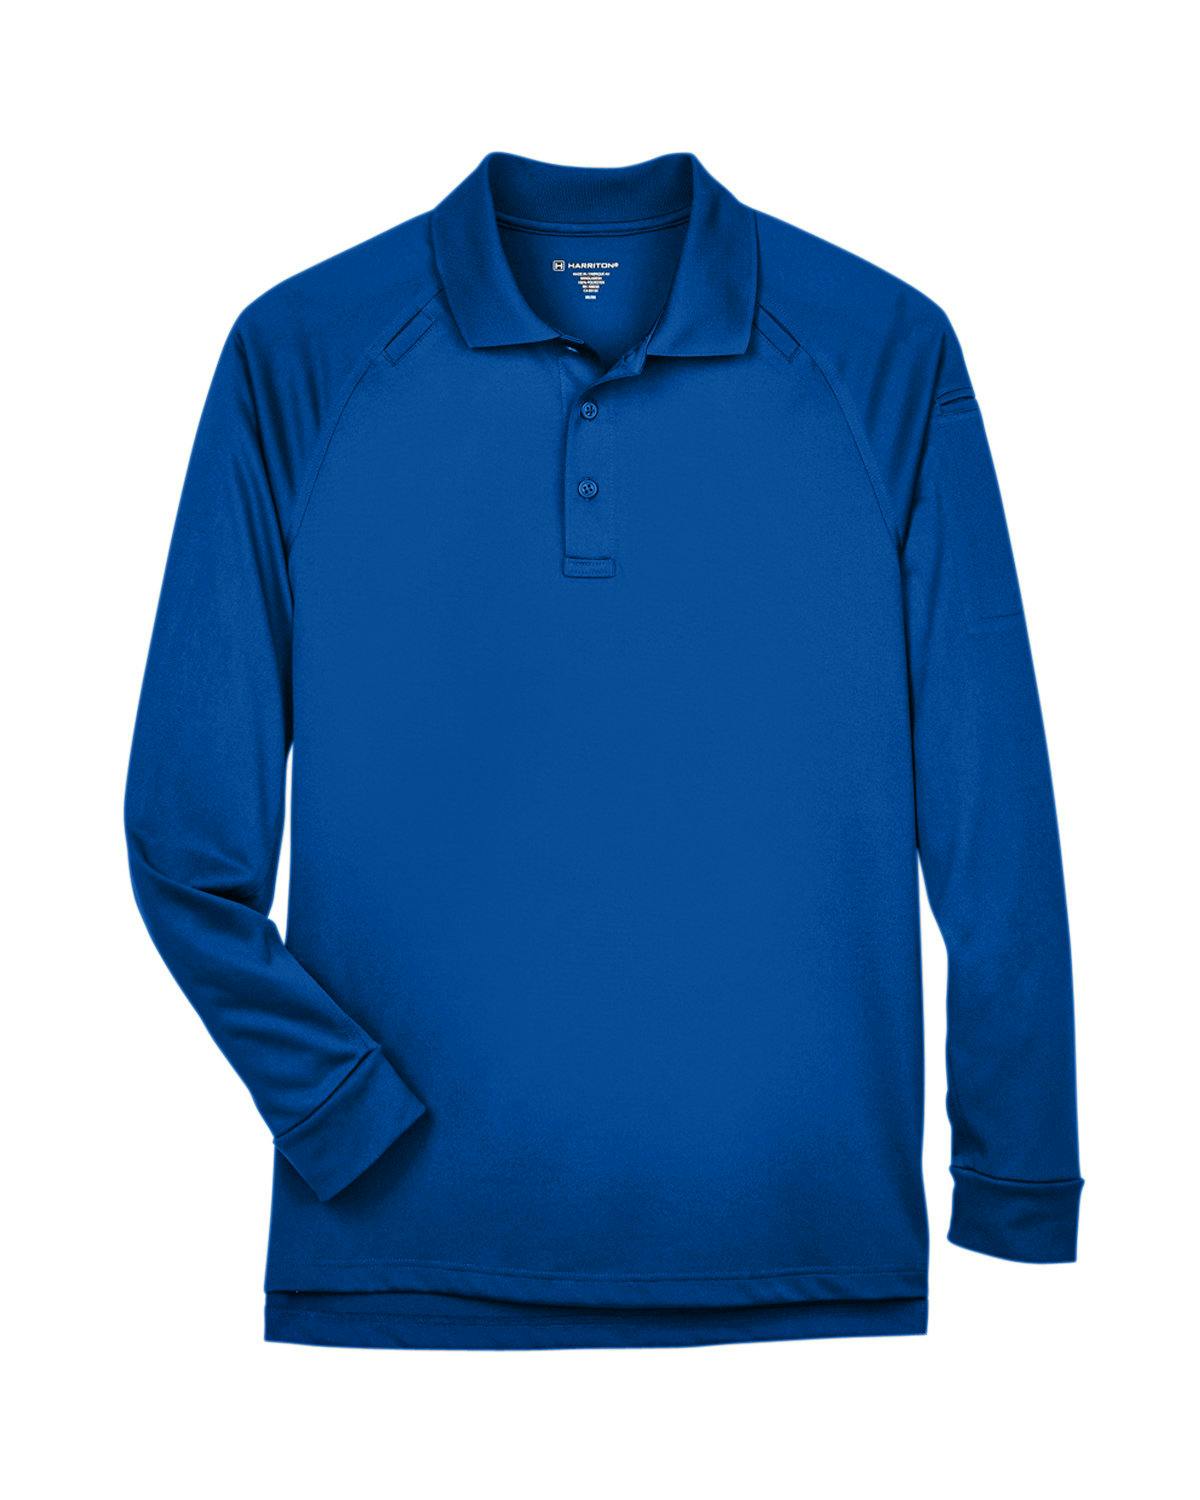 Image for Men's Advantage Snag Protection Plus Long-Sleeve Tactical Polo